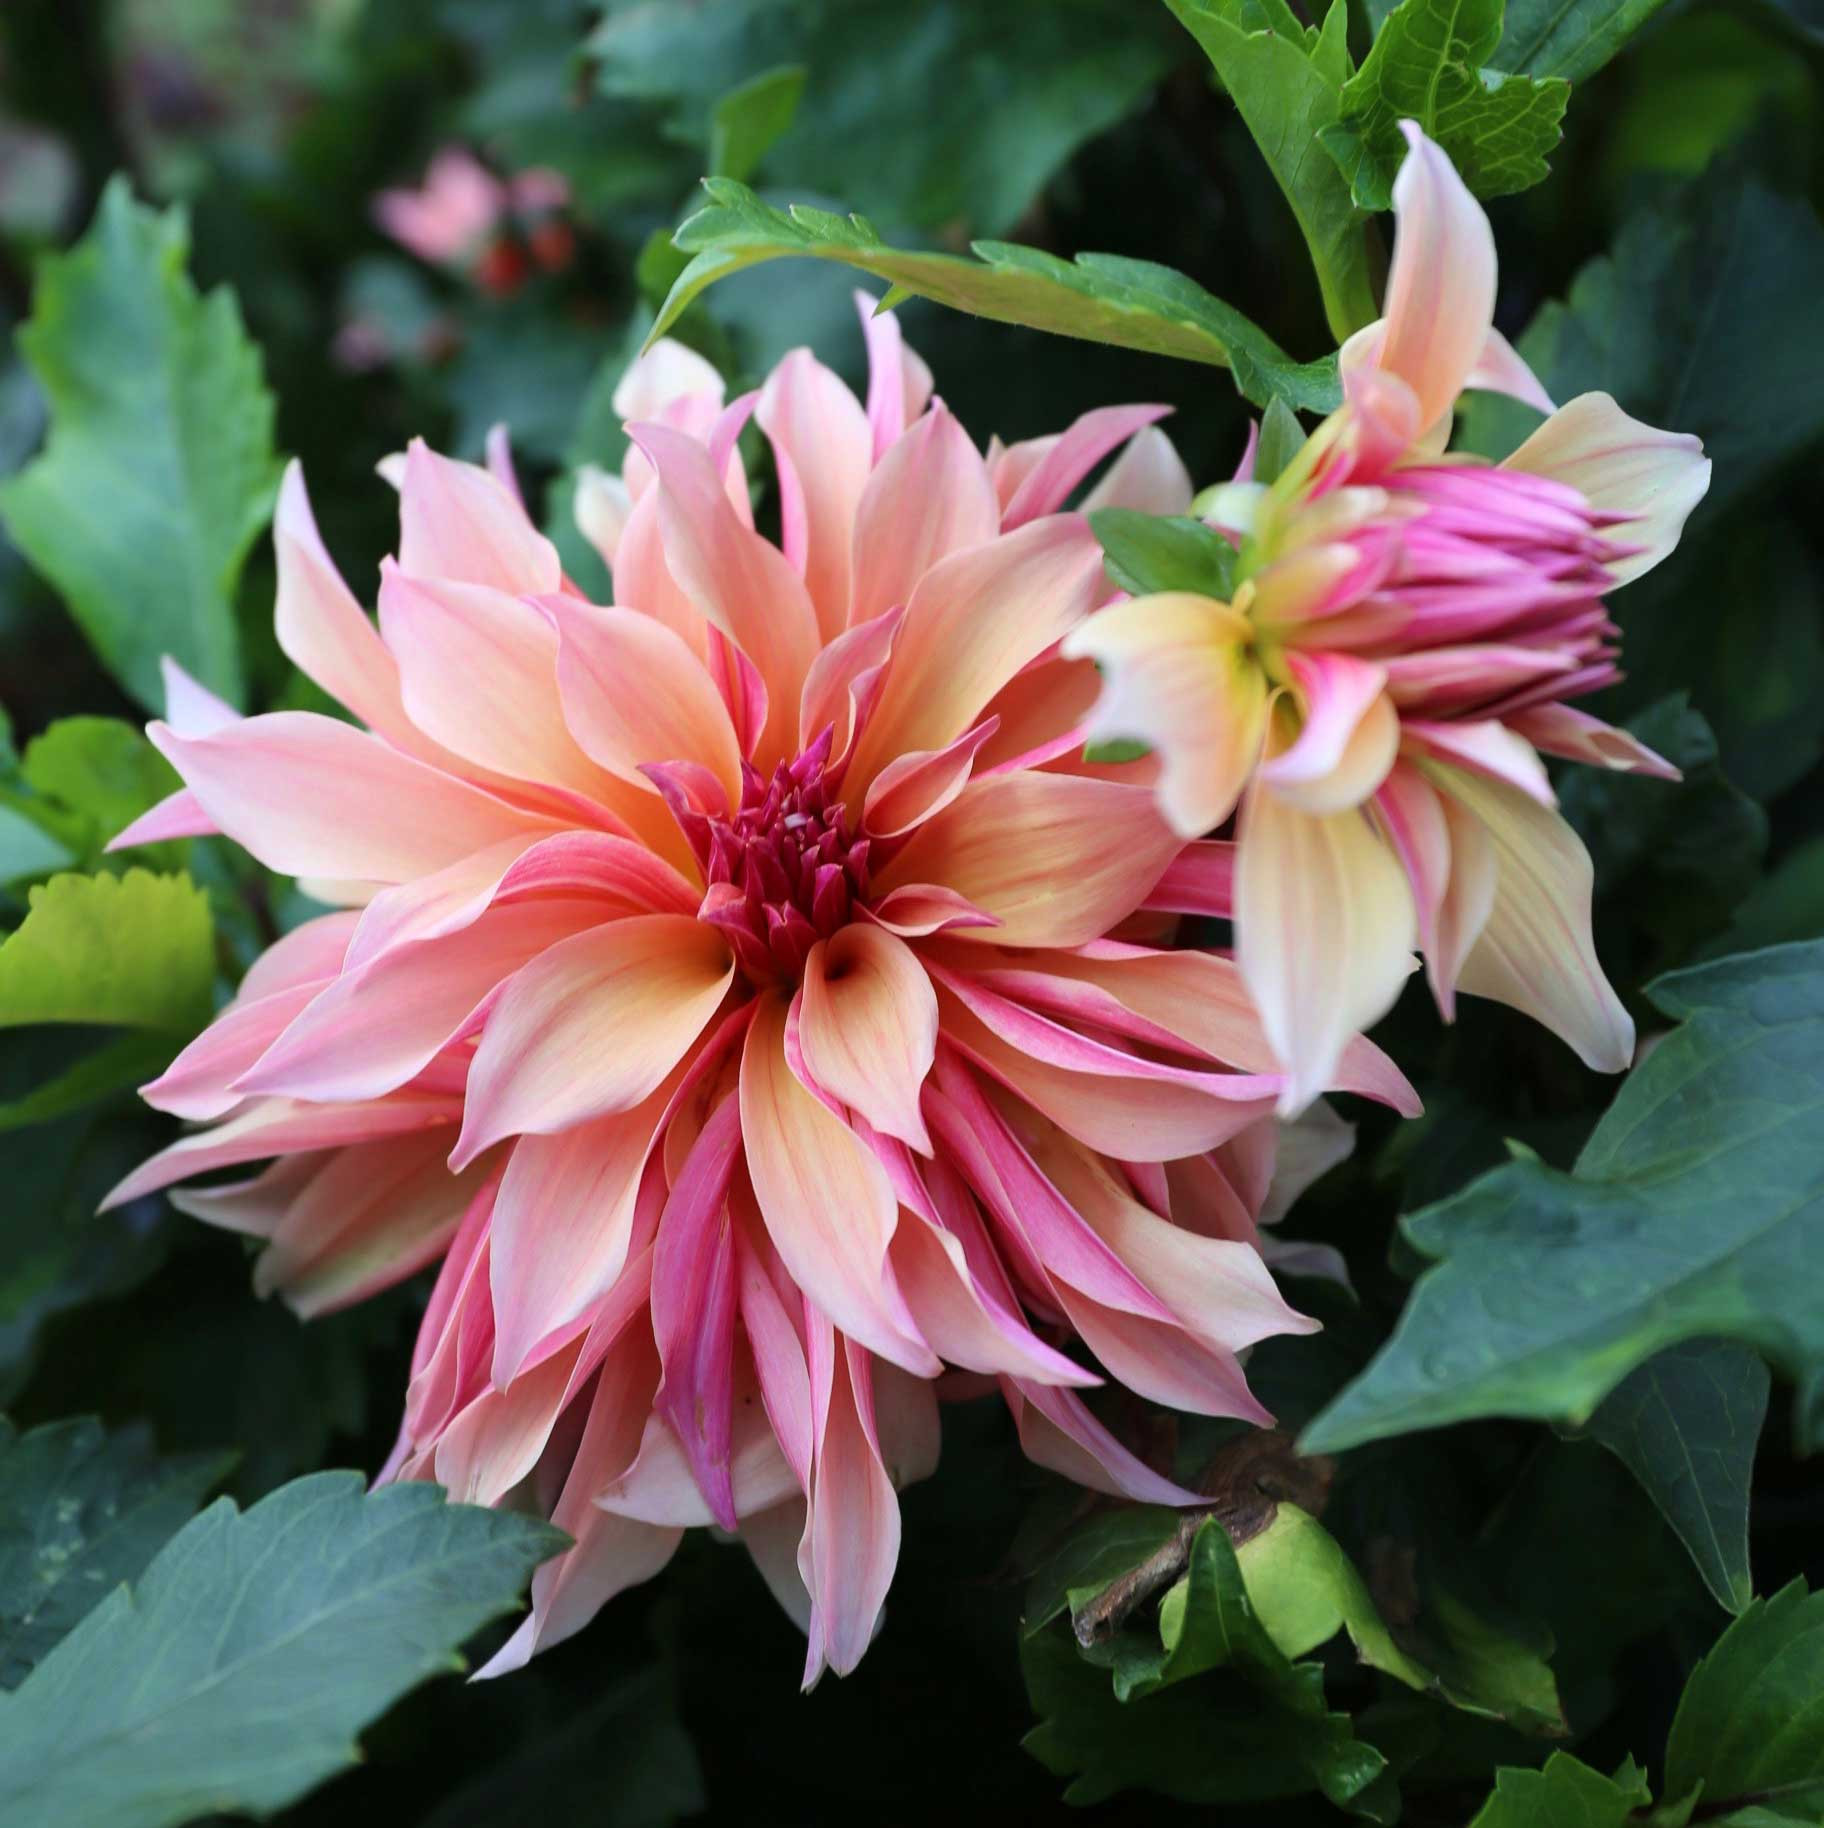 Expert Tips for Cutting, Conditioning and Arranging Dahlias - Longfield Gardens